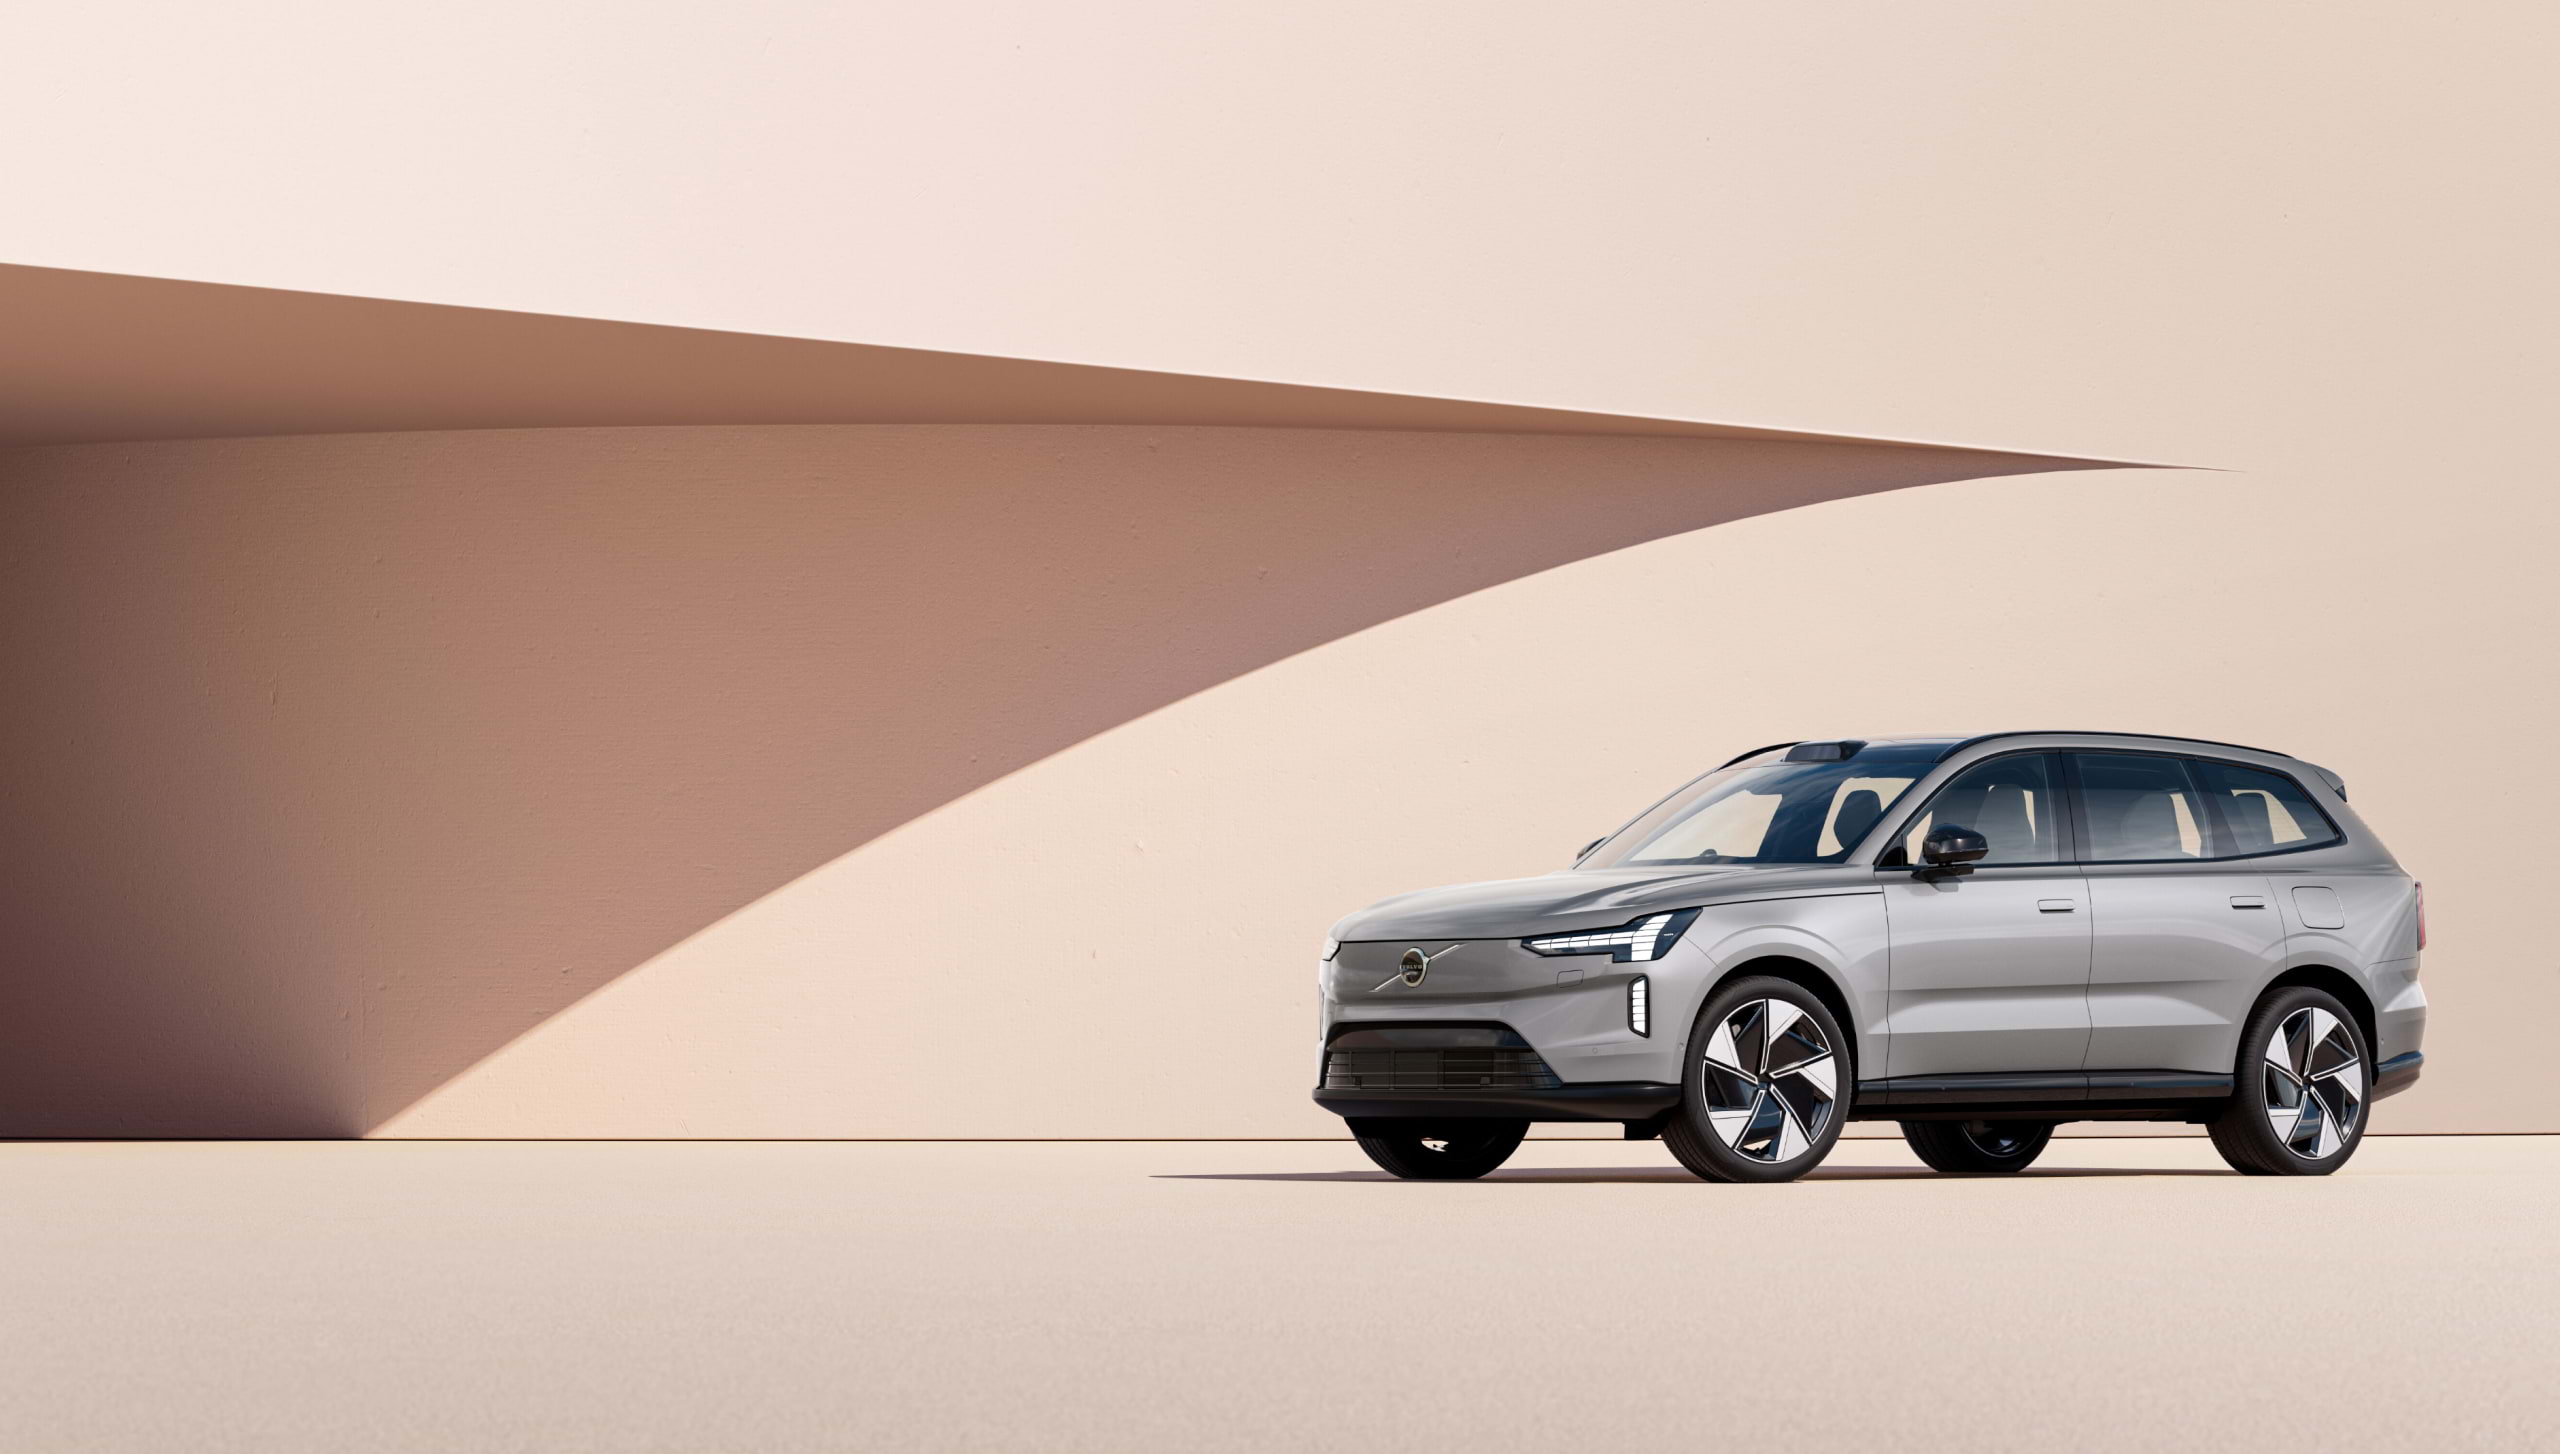 The Volvo EX90 fully electric SUV